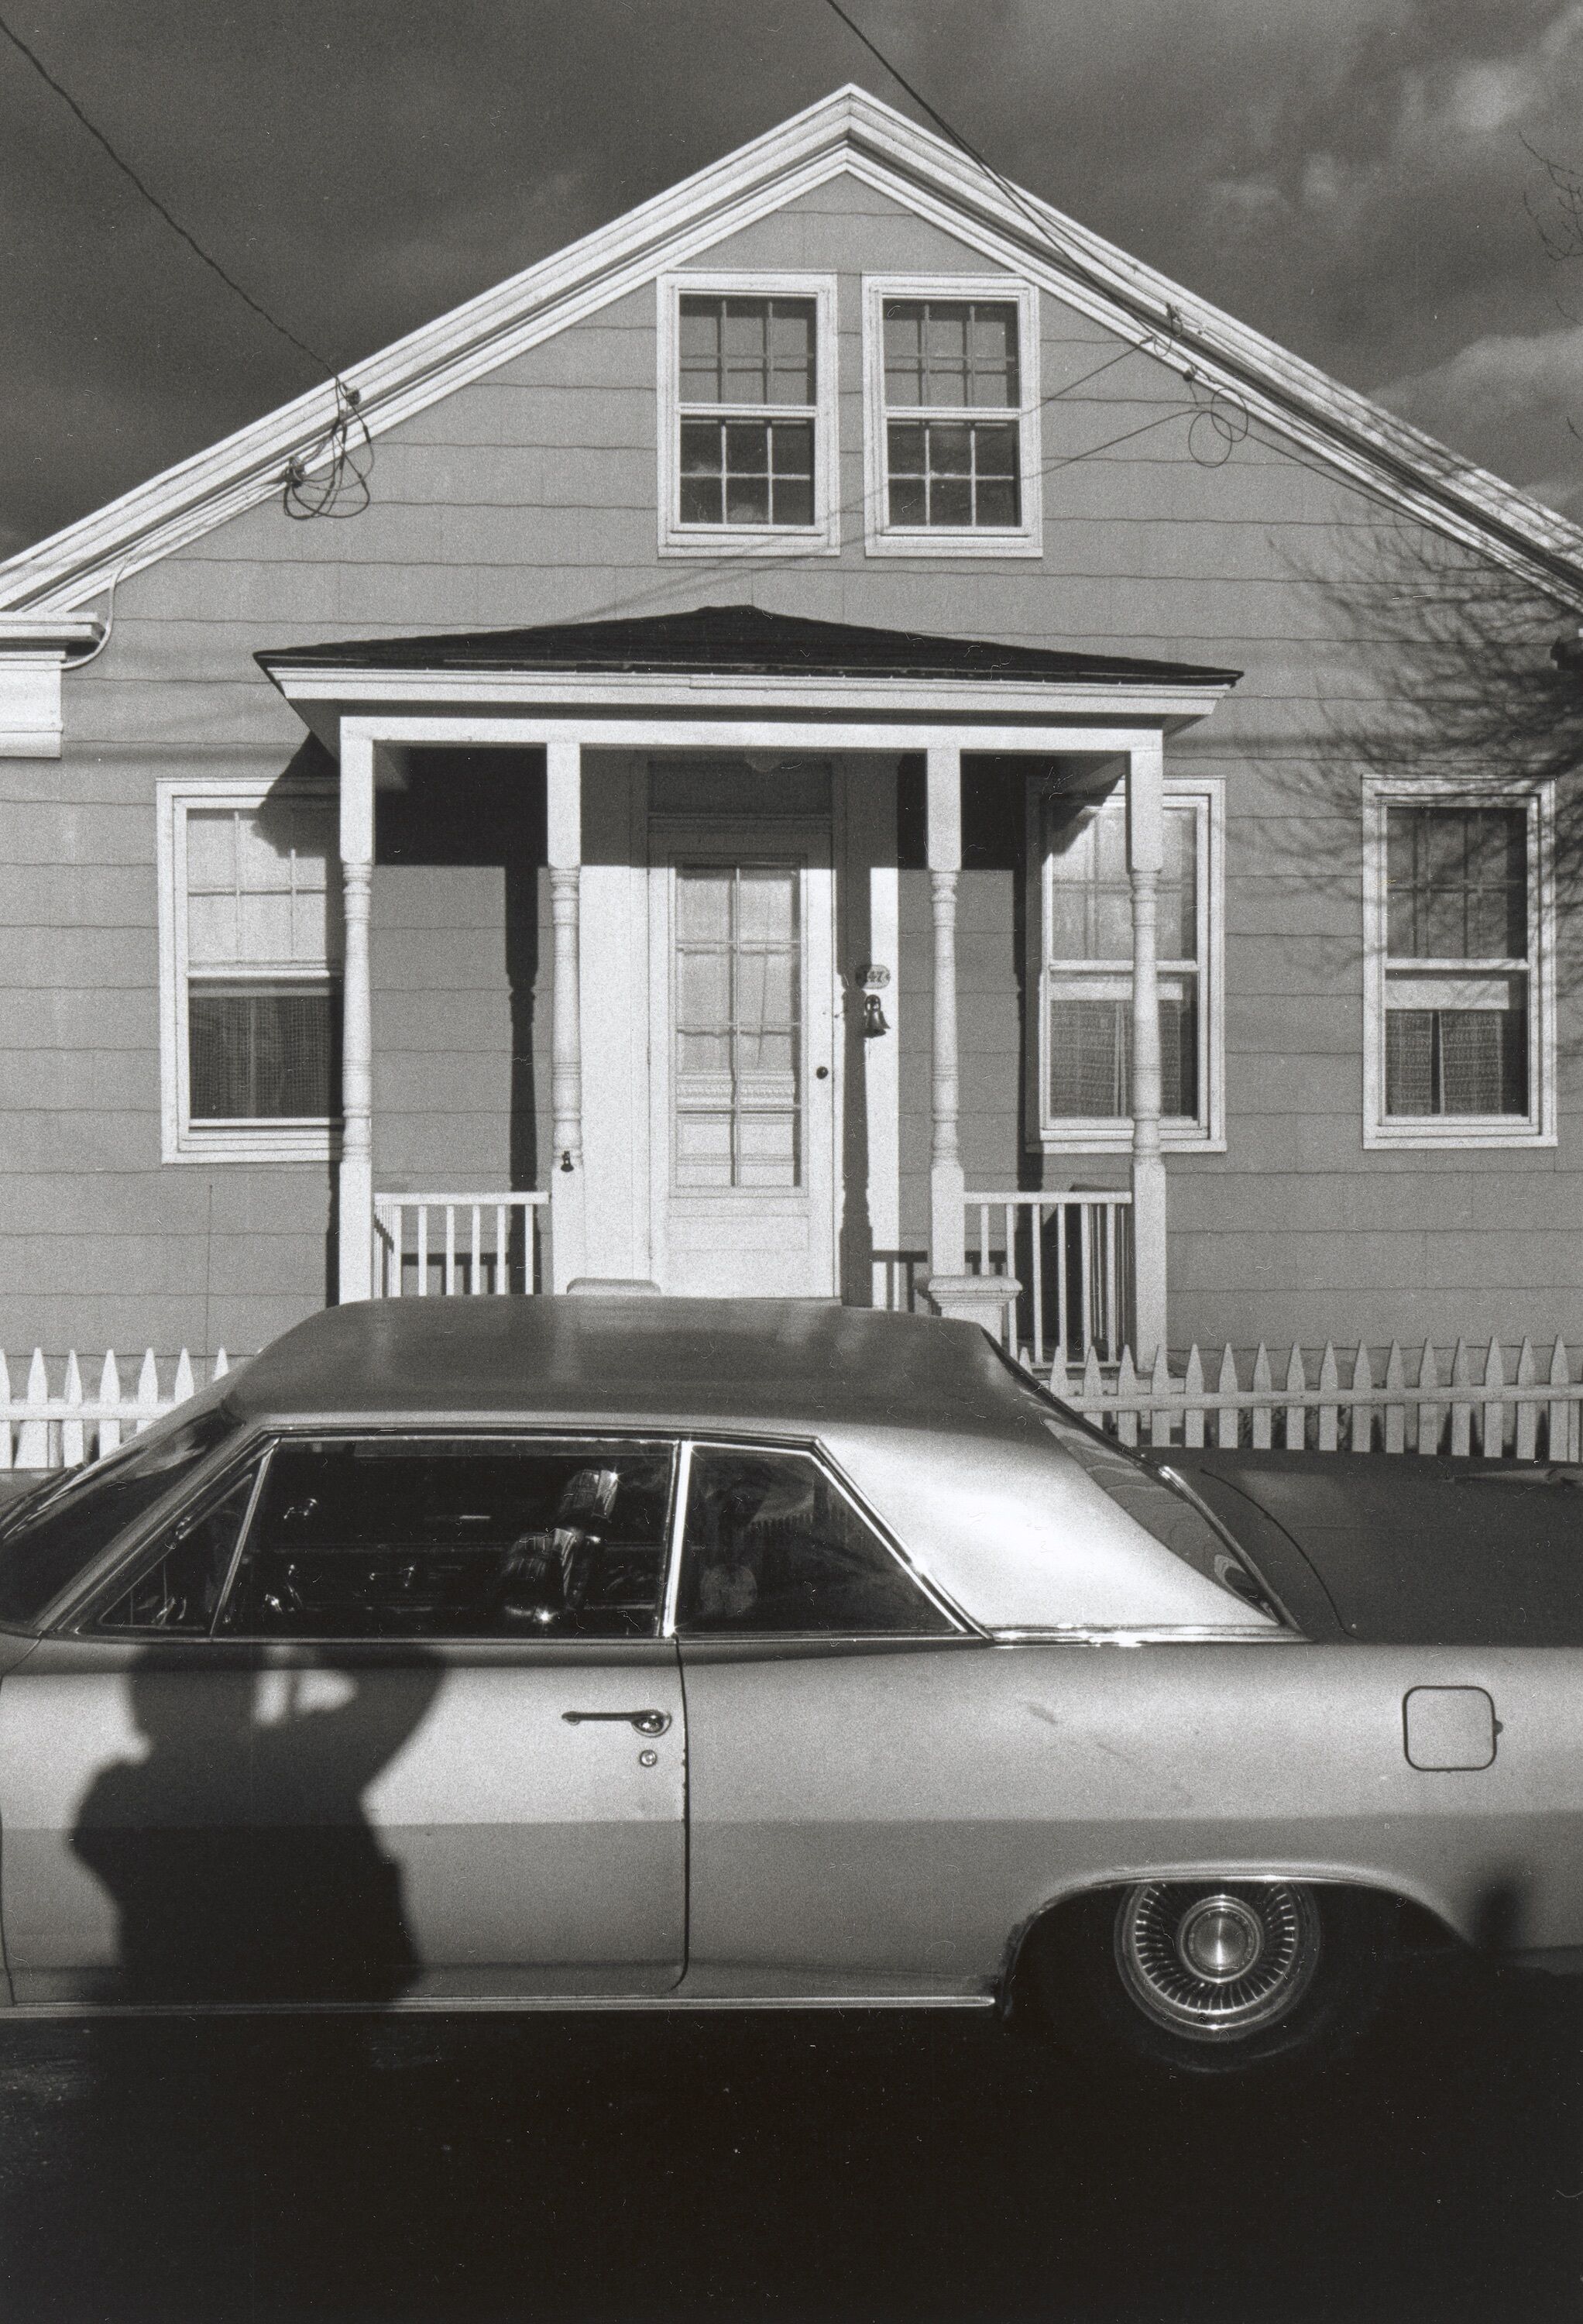 A house with a car parked in front of it, along with a shadow of a person shown on the car.